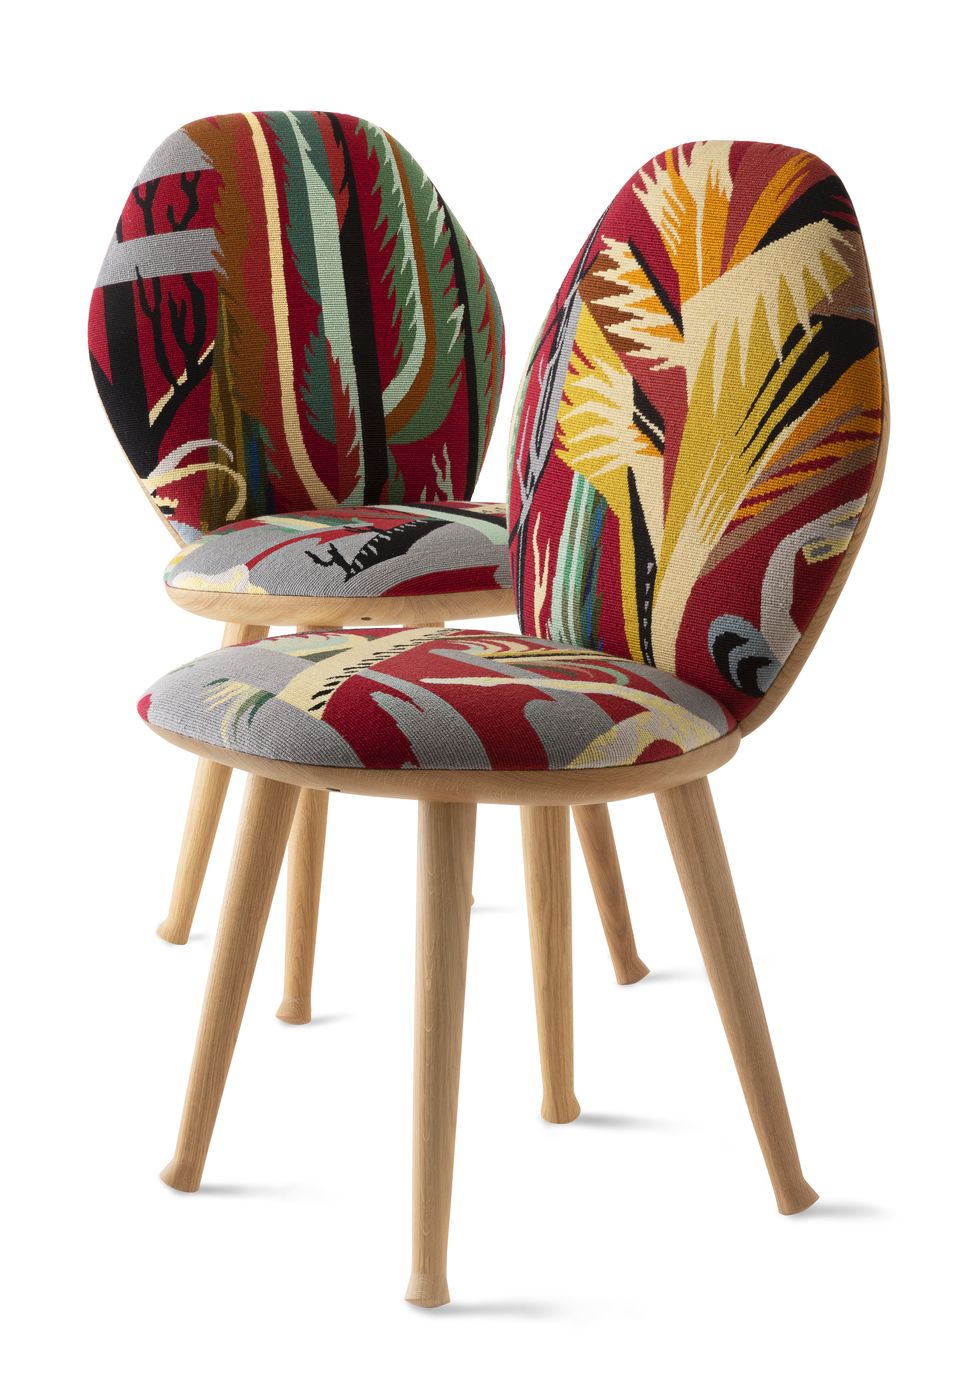 two colorful wooden chairs at right angles to each other with colorful patterned oval backs